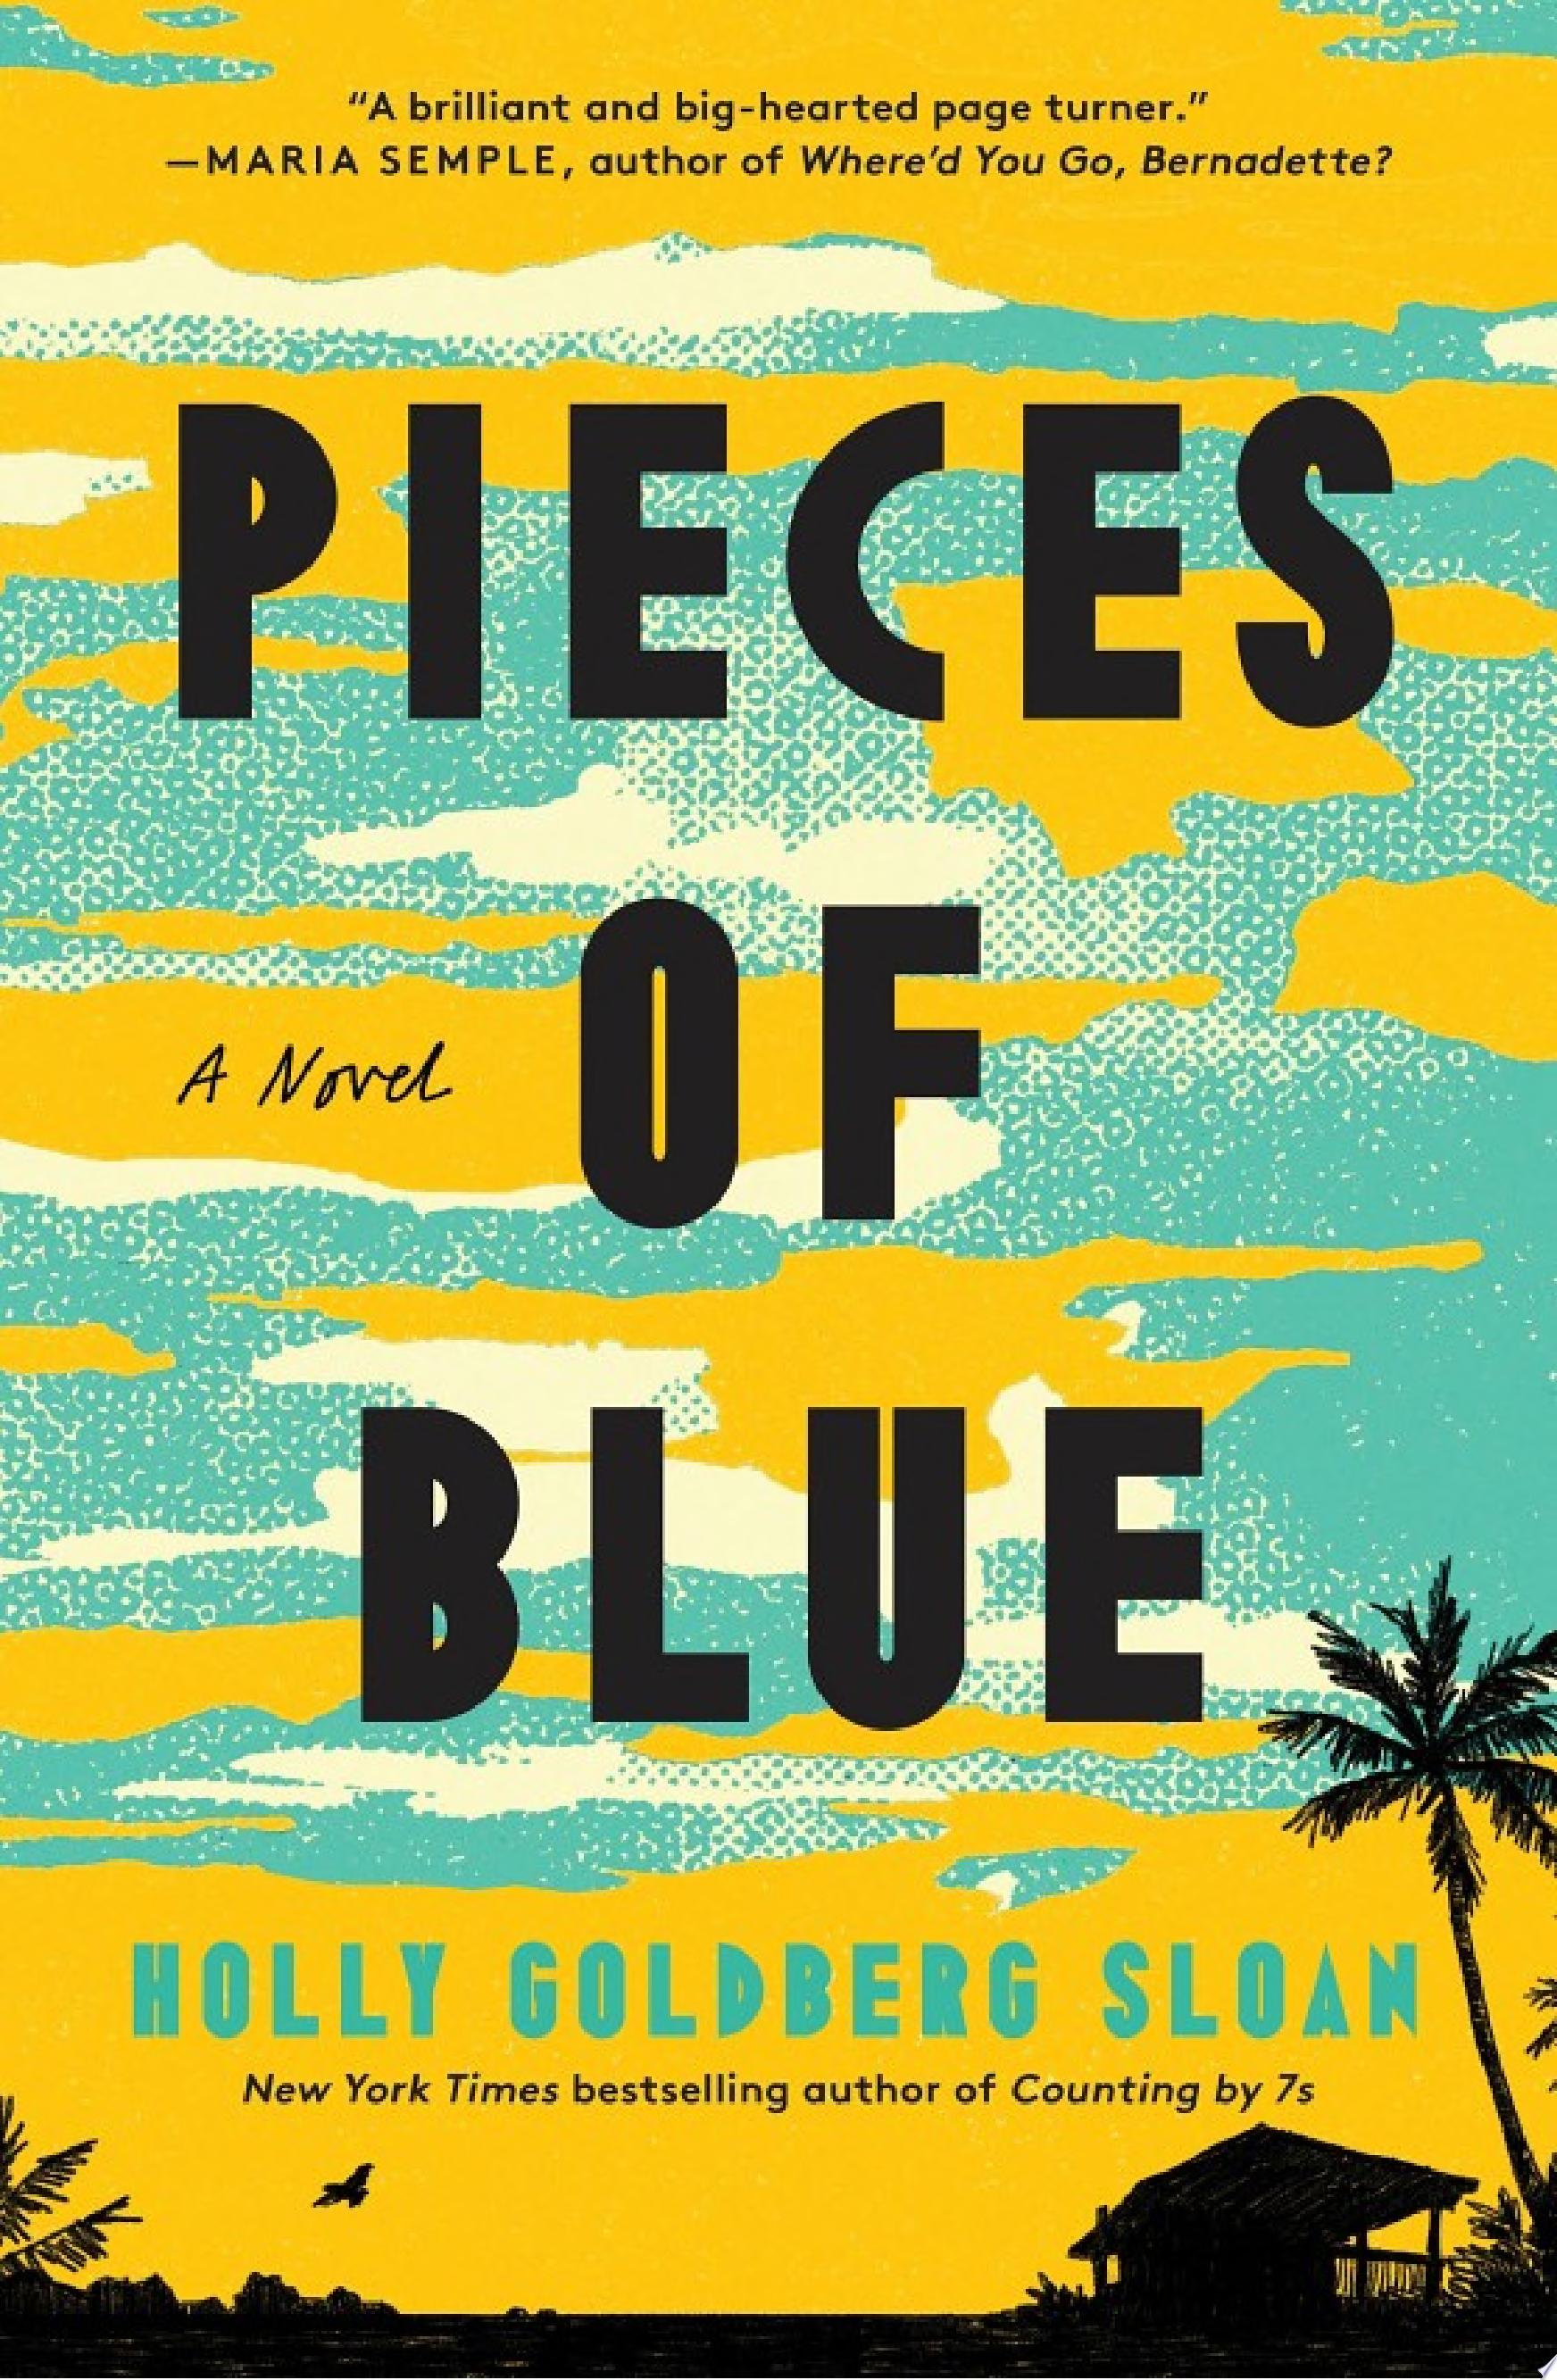 Image for "Pieces of Blue"